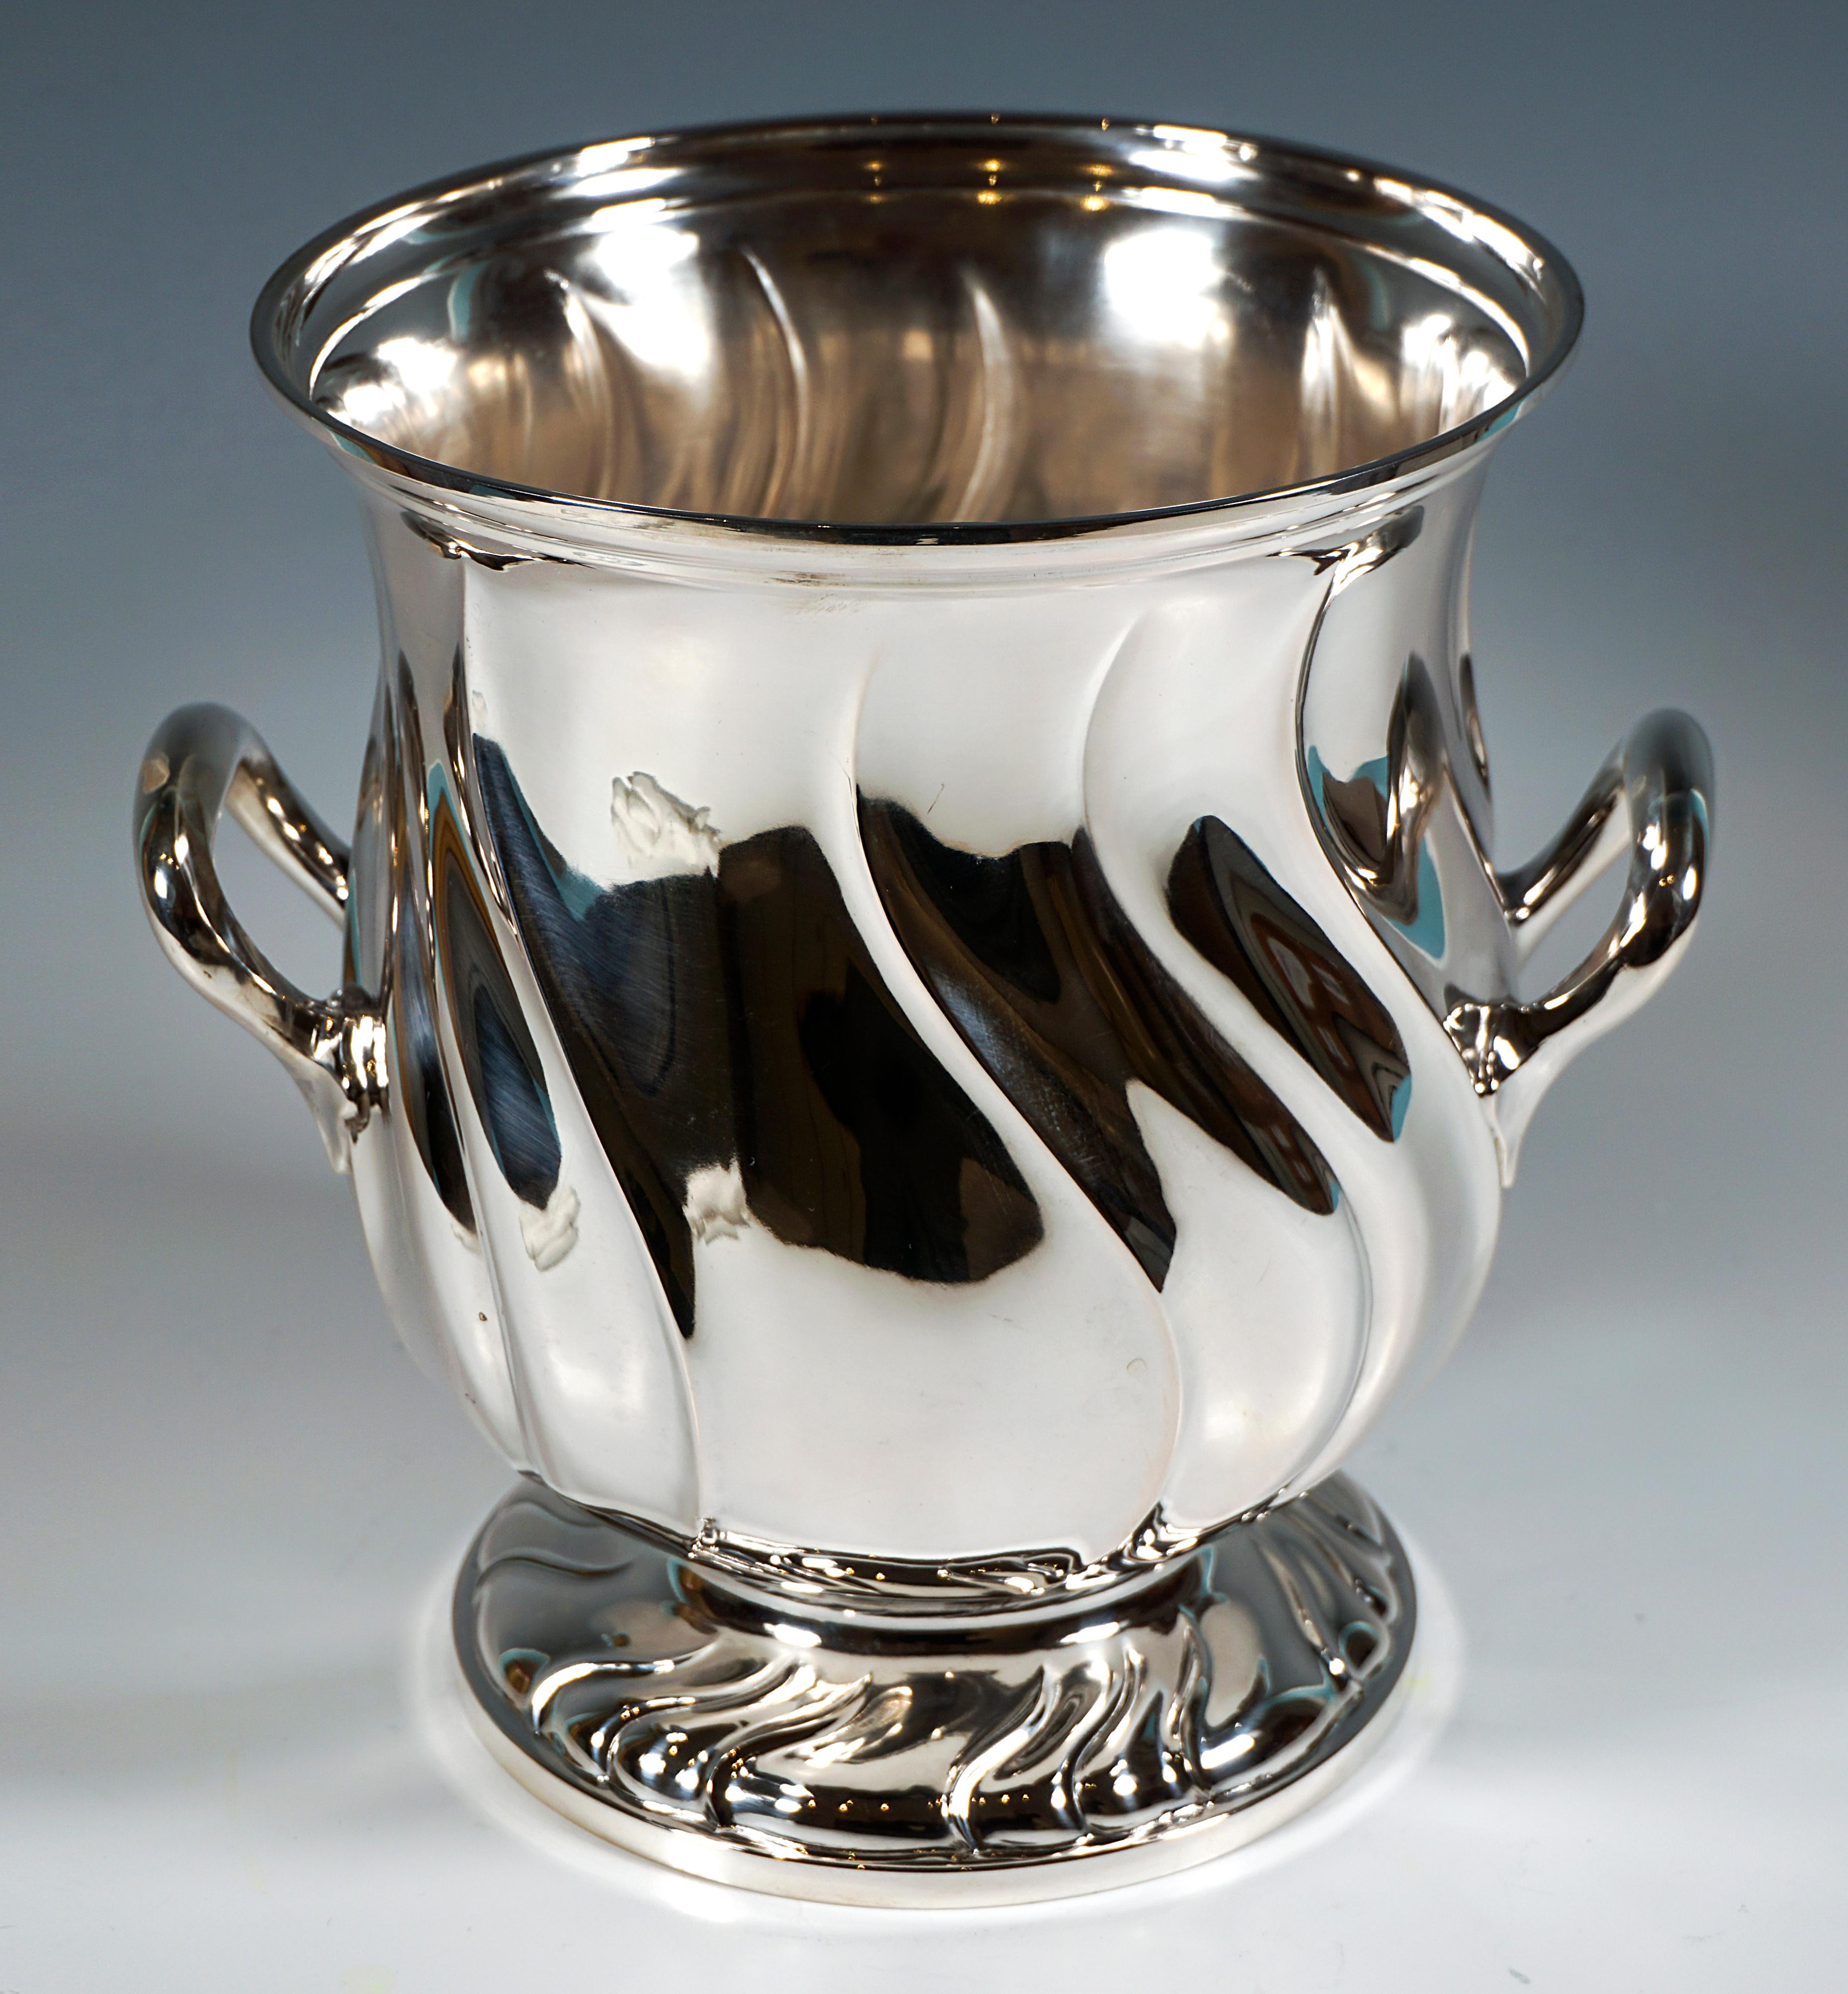 Hand-Crafted Silver Champagne Cooler In Tulip Shape, Wilkens & Sons Germany, 1919 For Sale